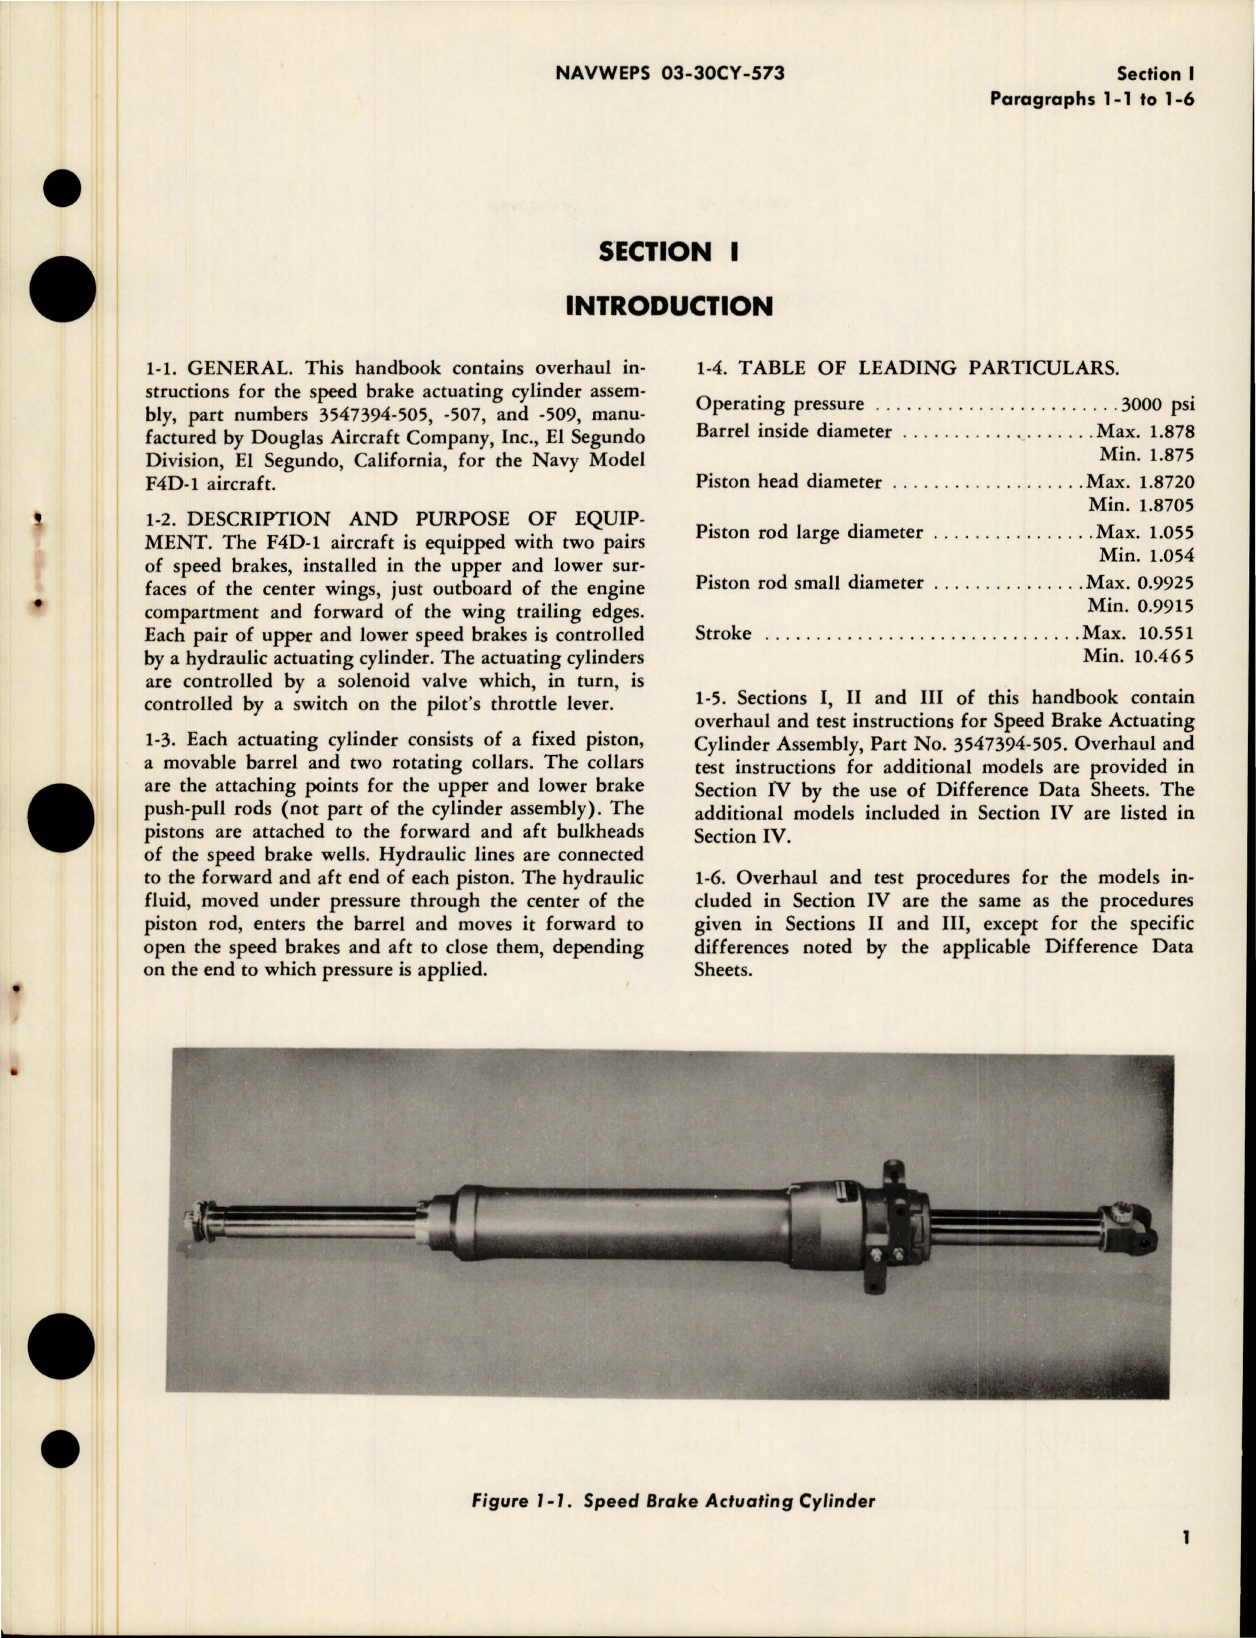 Sample page 5 from AirCorps Library document: Overhaul Instructions for Speed Brake Actuating Cylinder